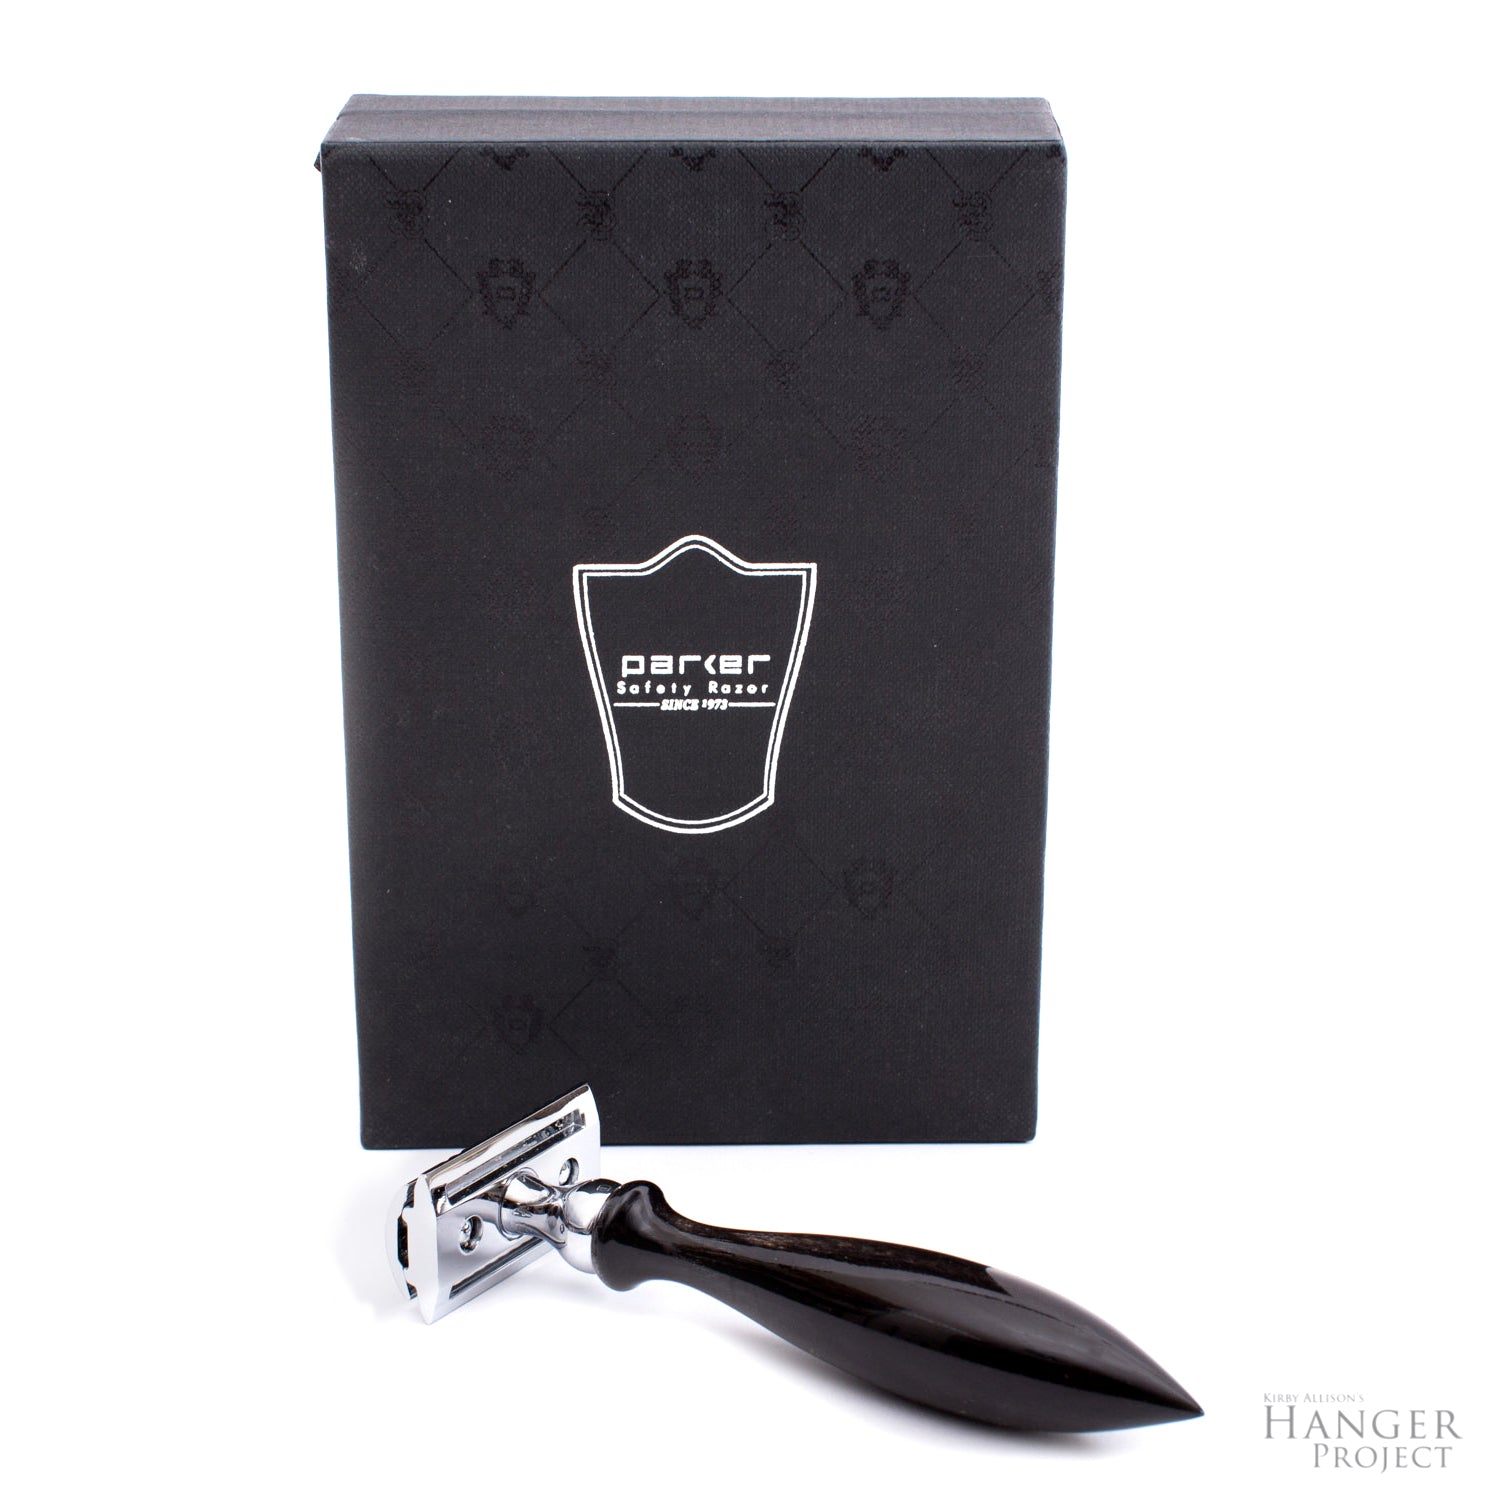 A black Parker 3-Piece Horn Safety Razor from KirbyAllison.com with a black box in front.